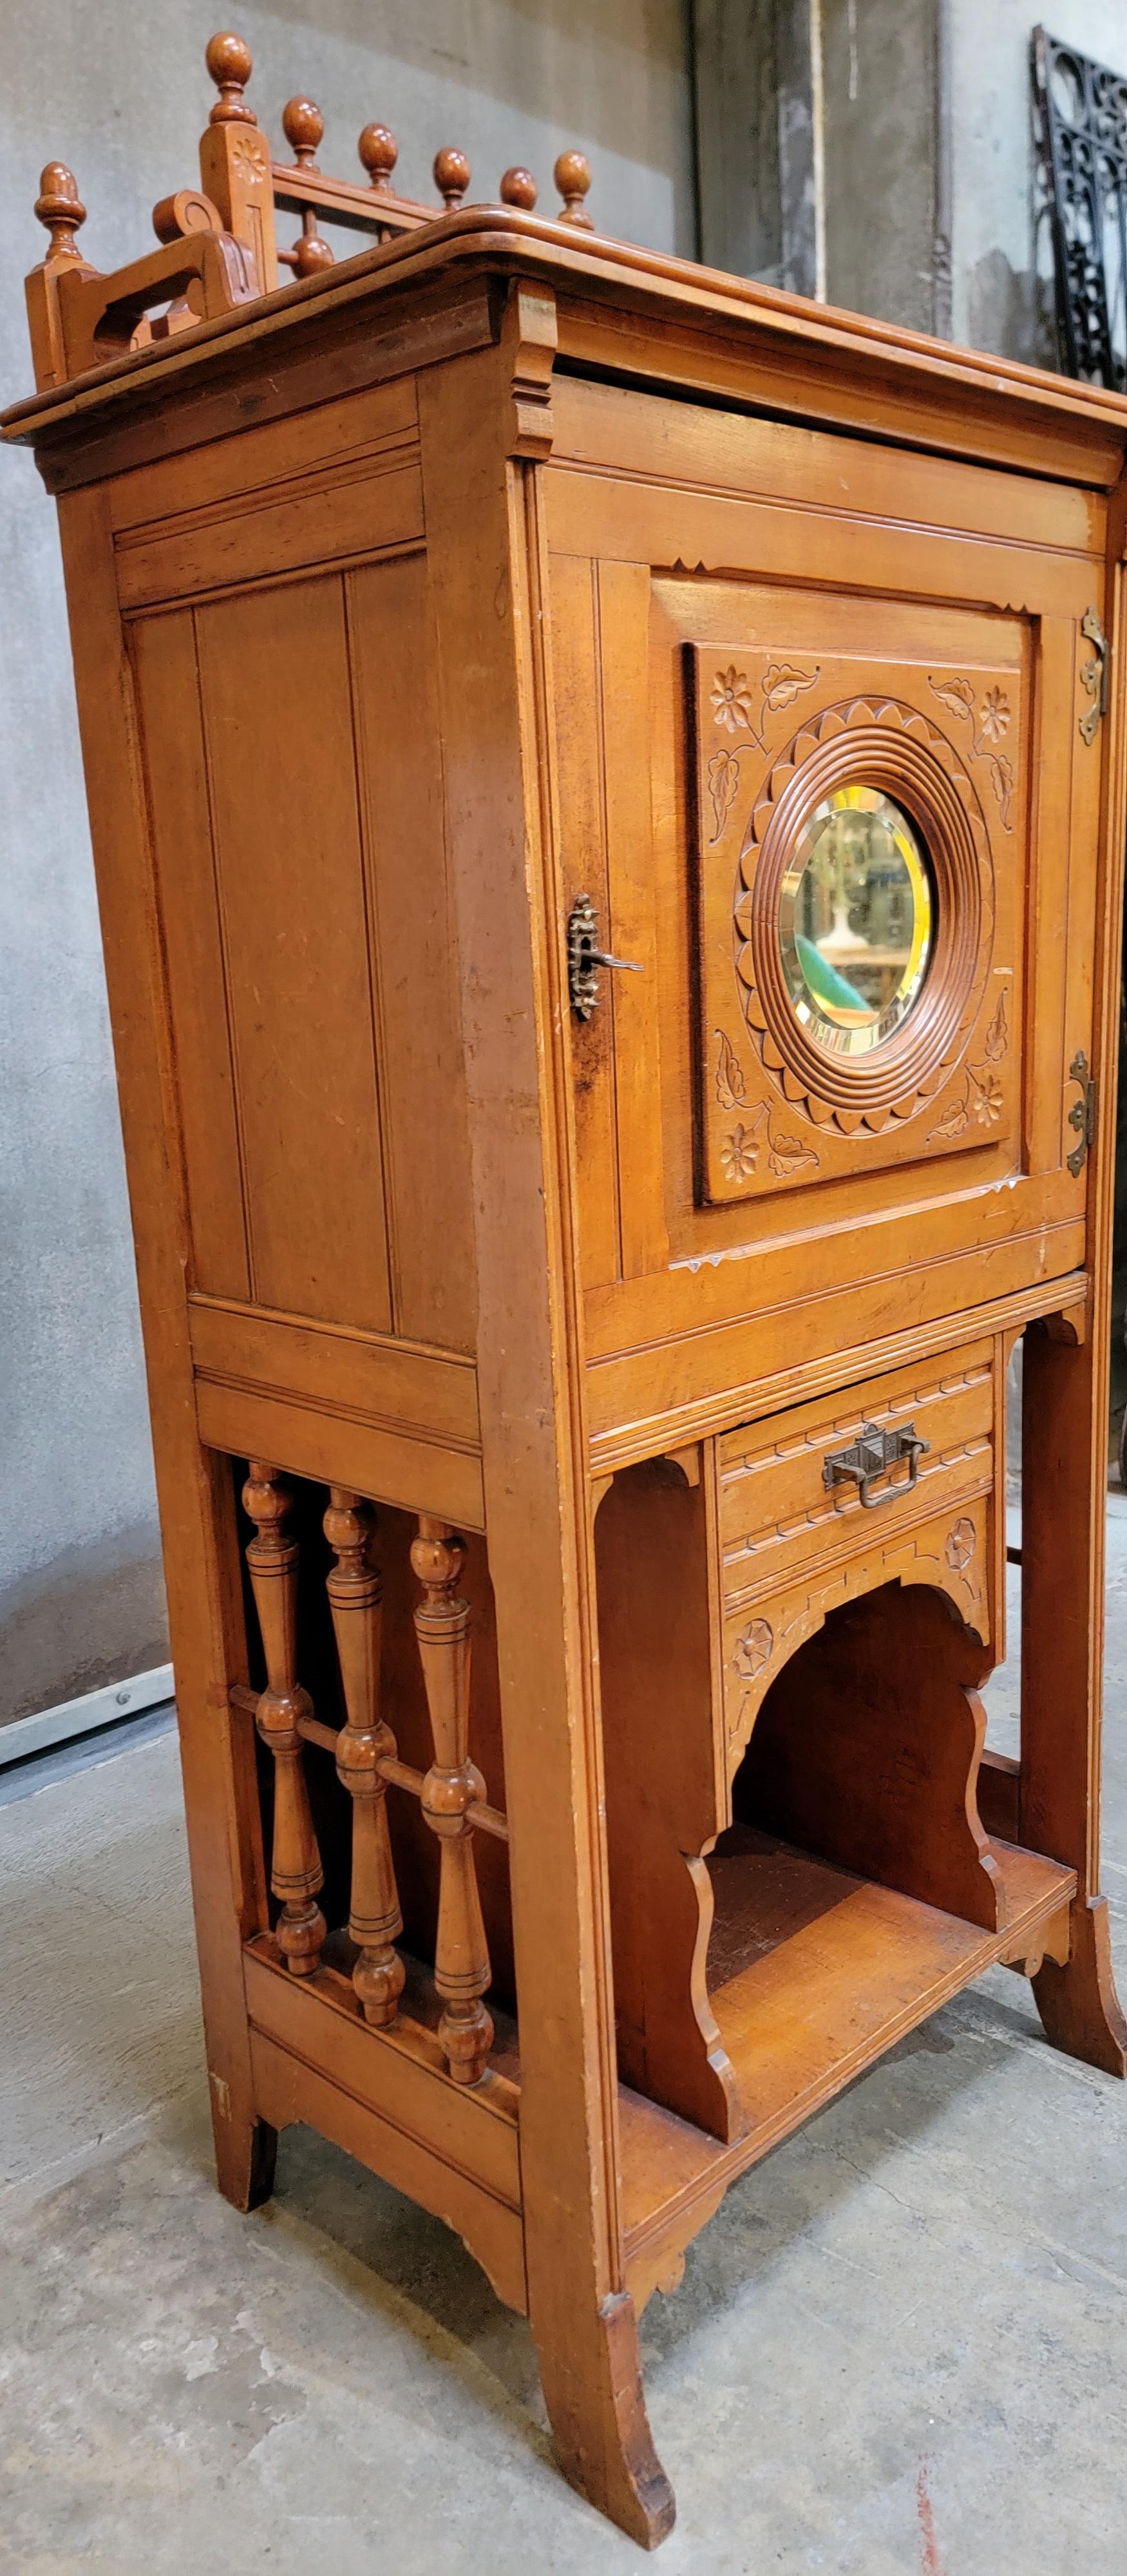 Charming and petite music cabinet with stick & ball detail. Circular beveled mirror on door, shelving to interior of cabinet. Original finish with age appropriate wear and fade. 